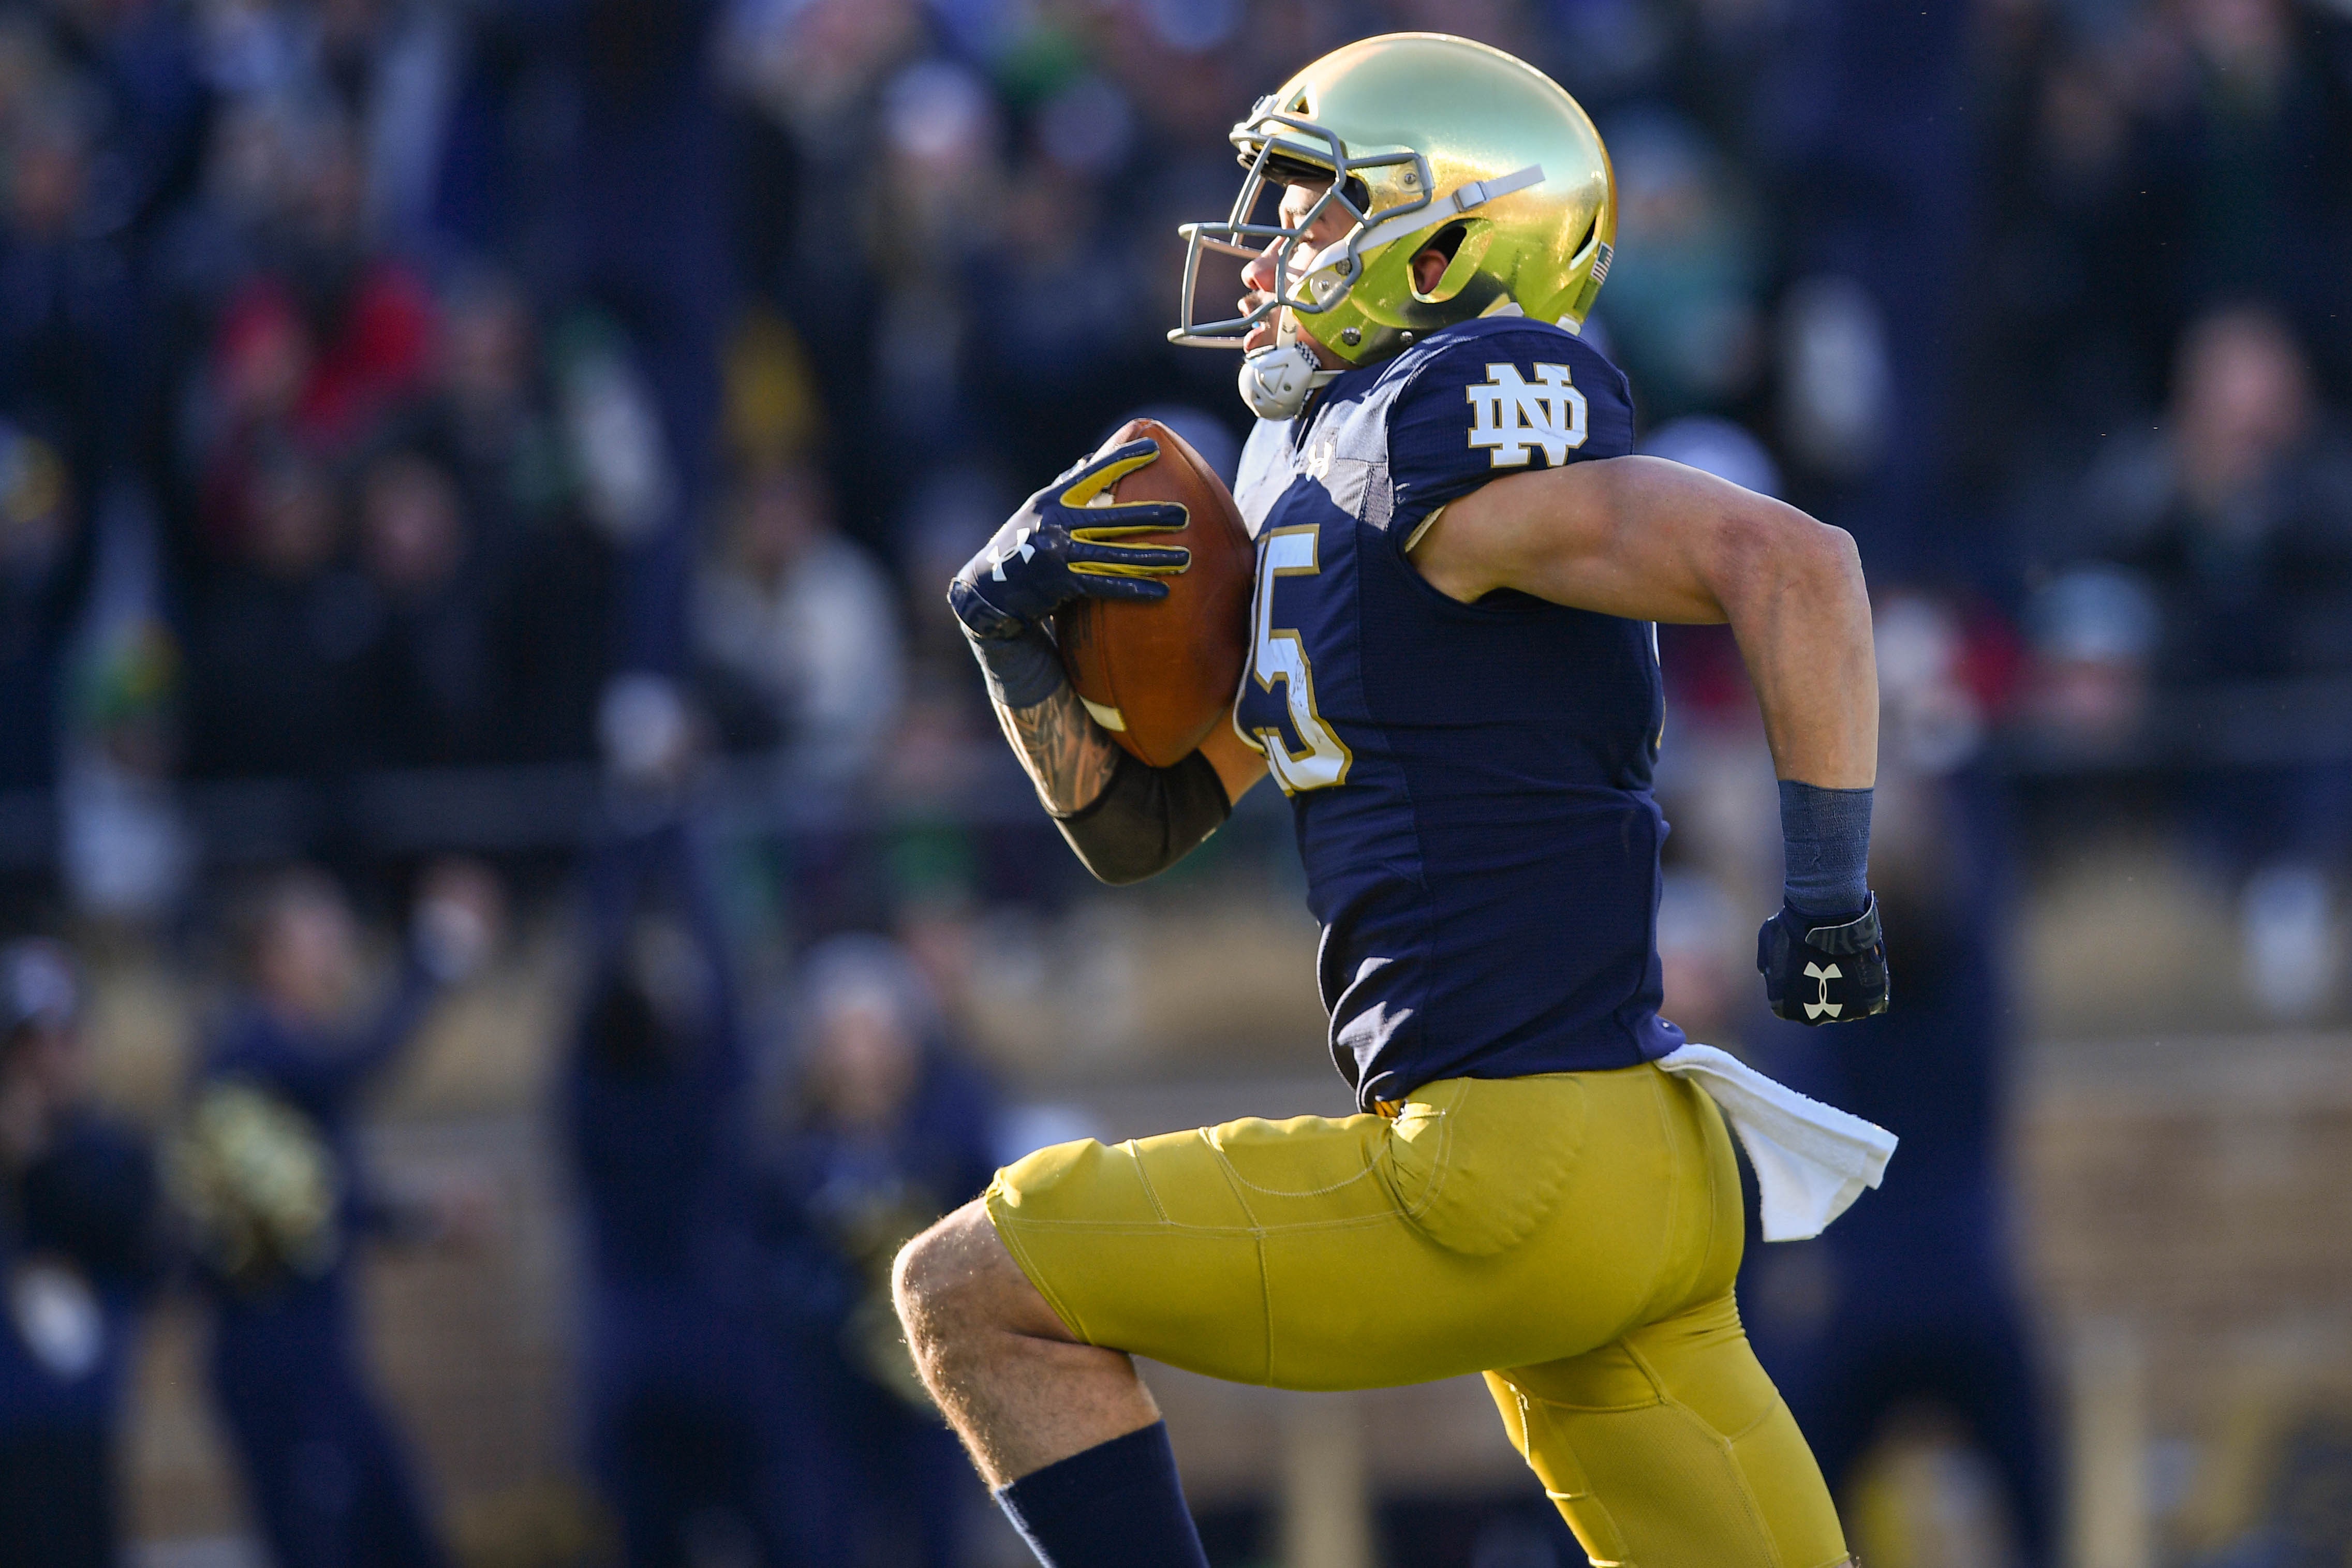 Notre Dame depth chart 2020: Ranking the wide receivers